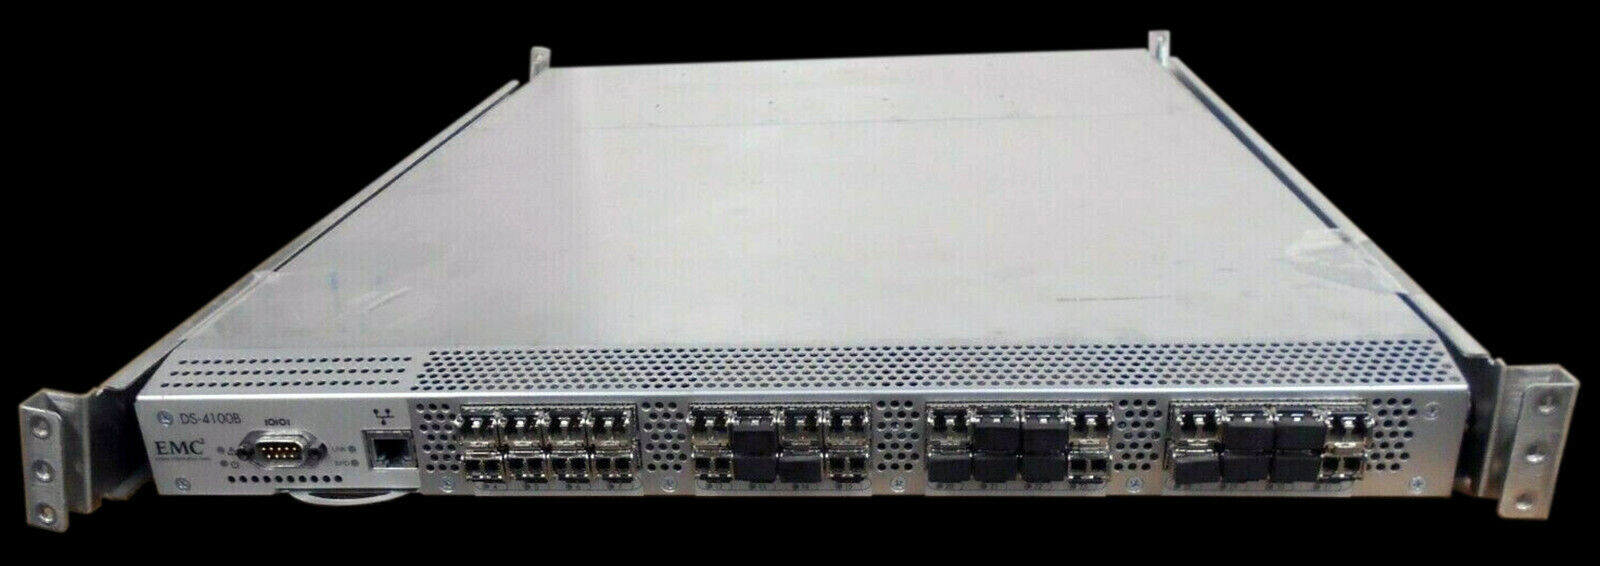 EMC2 DS-4100B 32-Port Fibre Channel Switch, W/ 32* Finisar FTLF8524P2BNV-BR GBIC